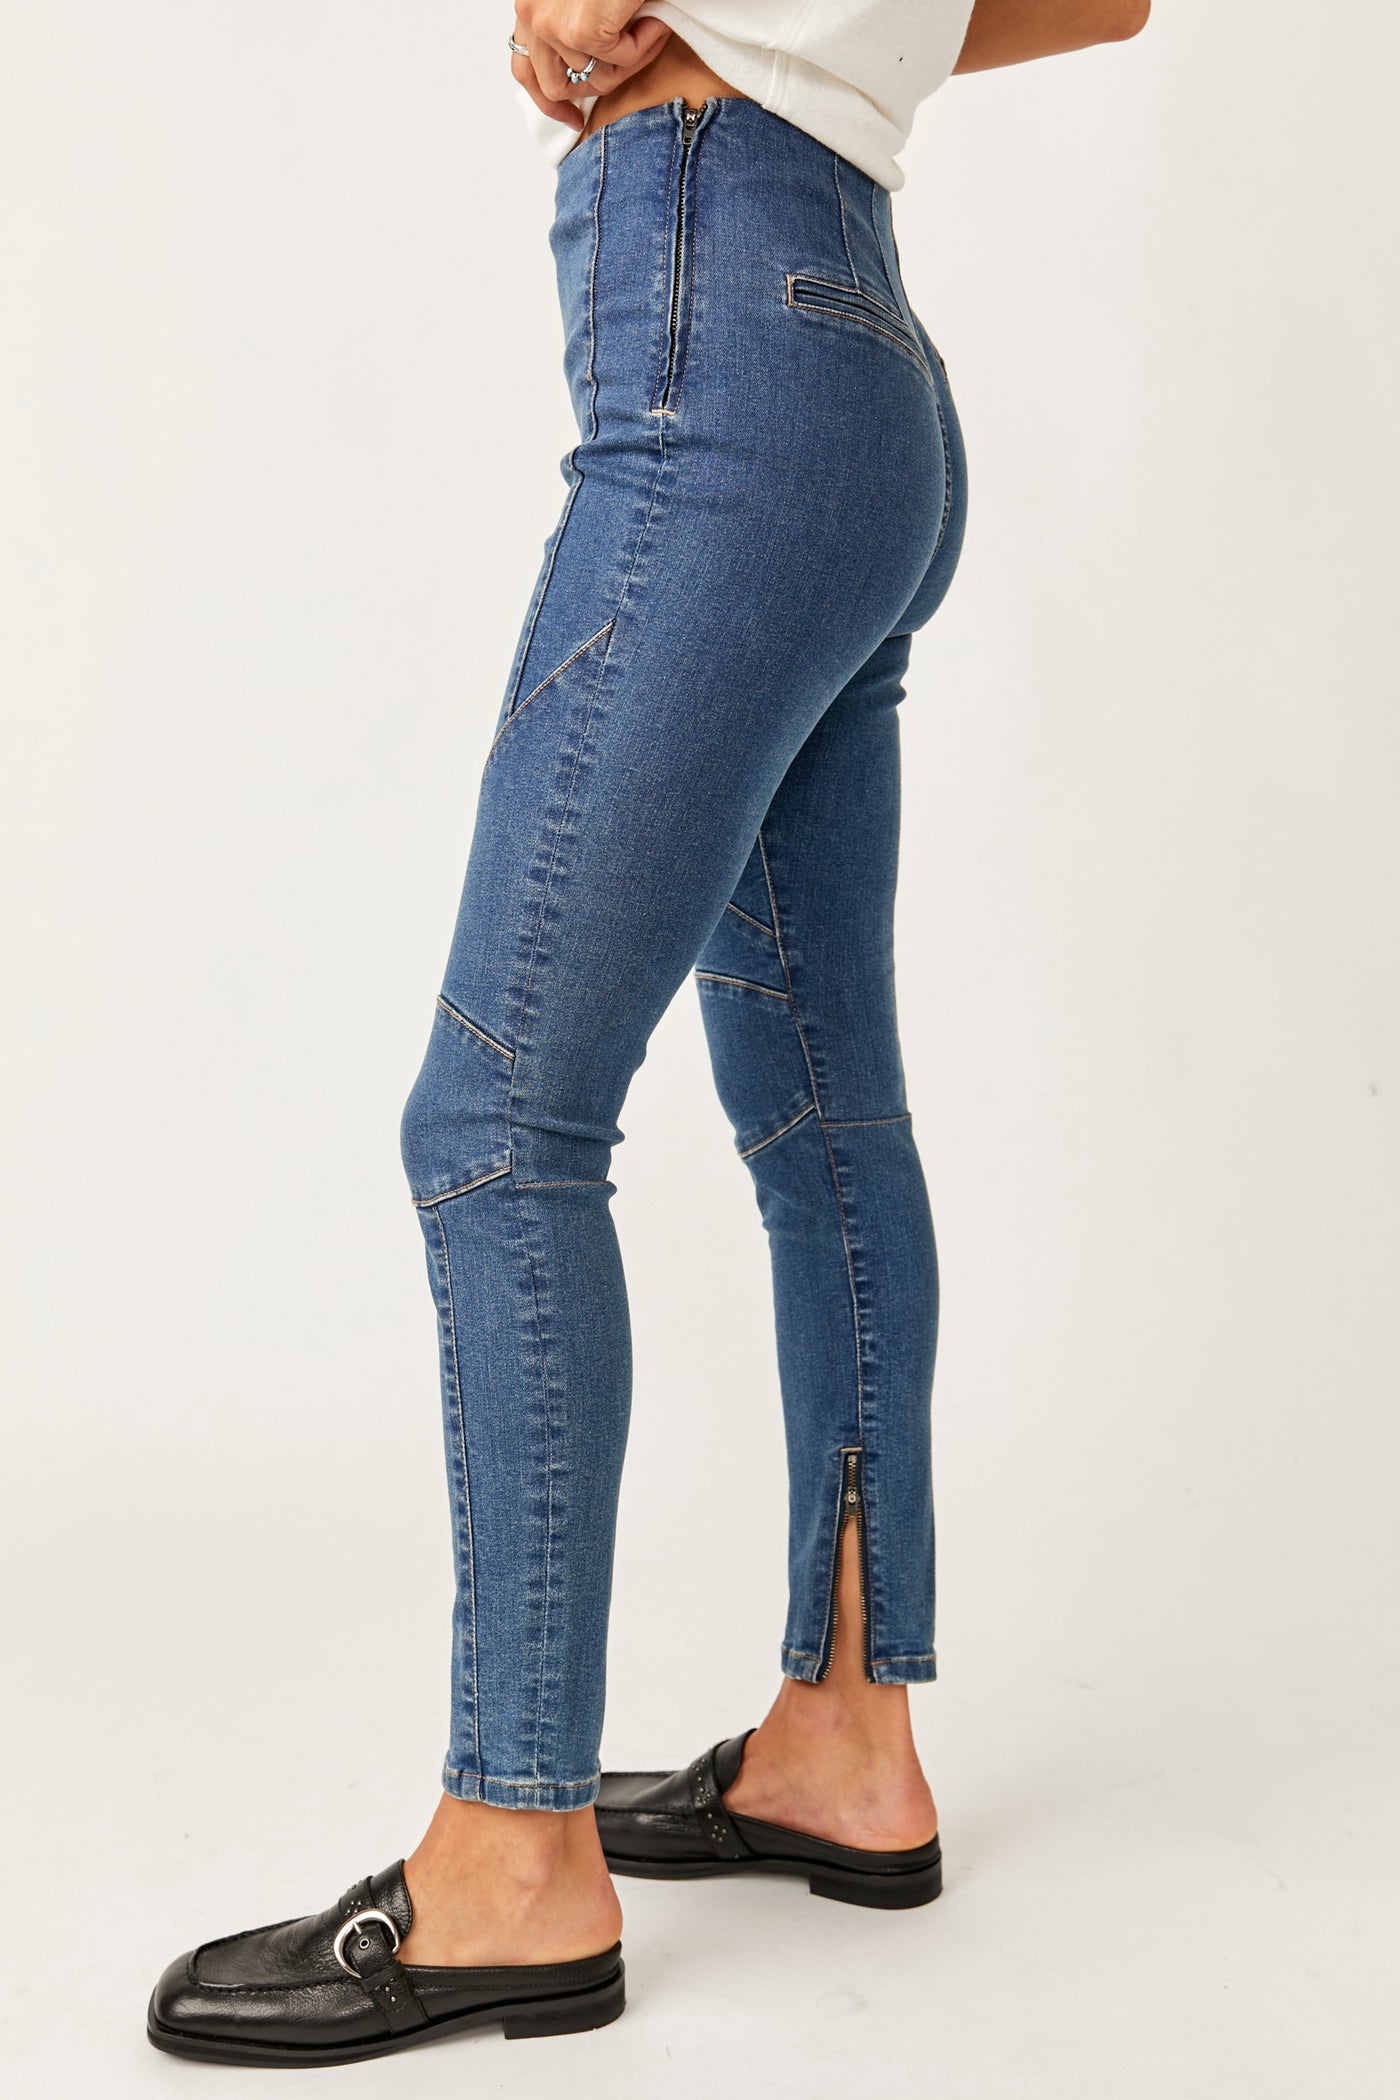 Free People We The Free Bella Moto High-Rise Skinny Jeans